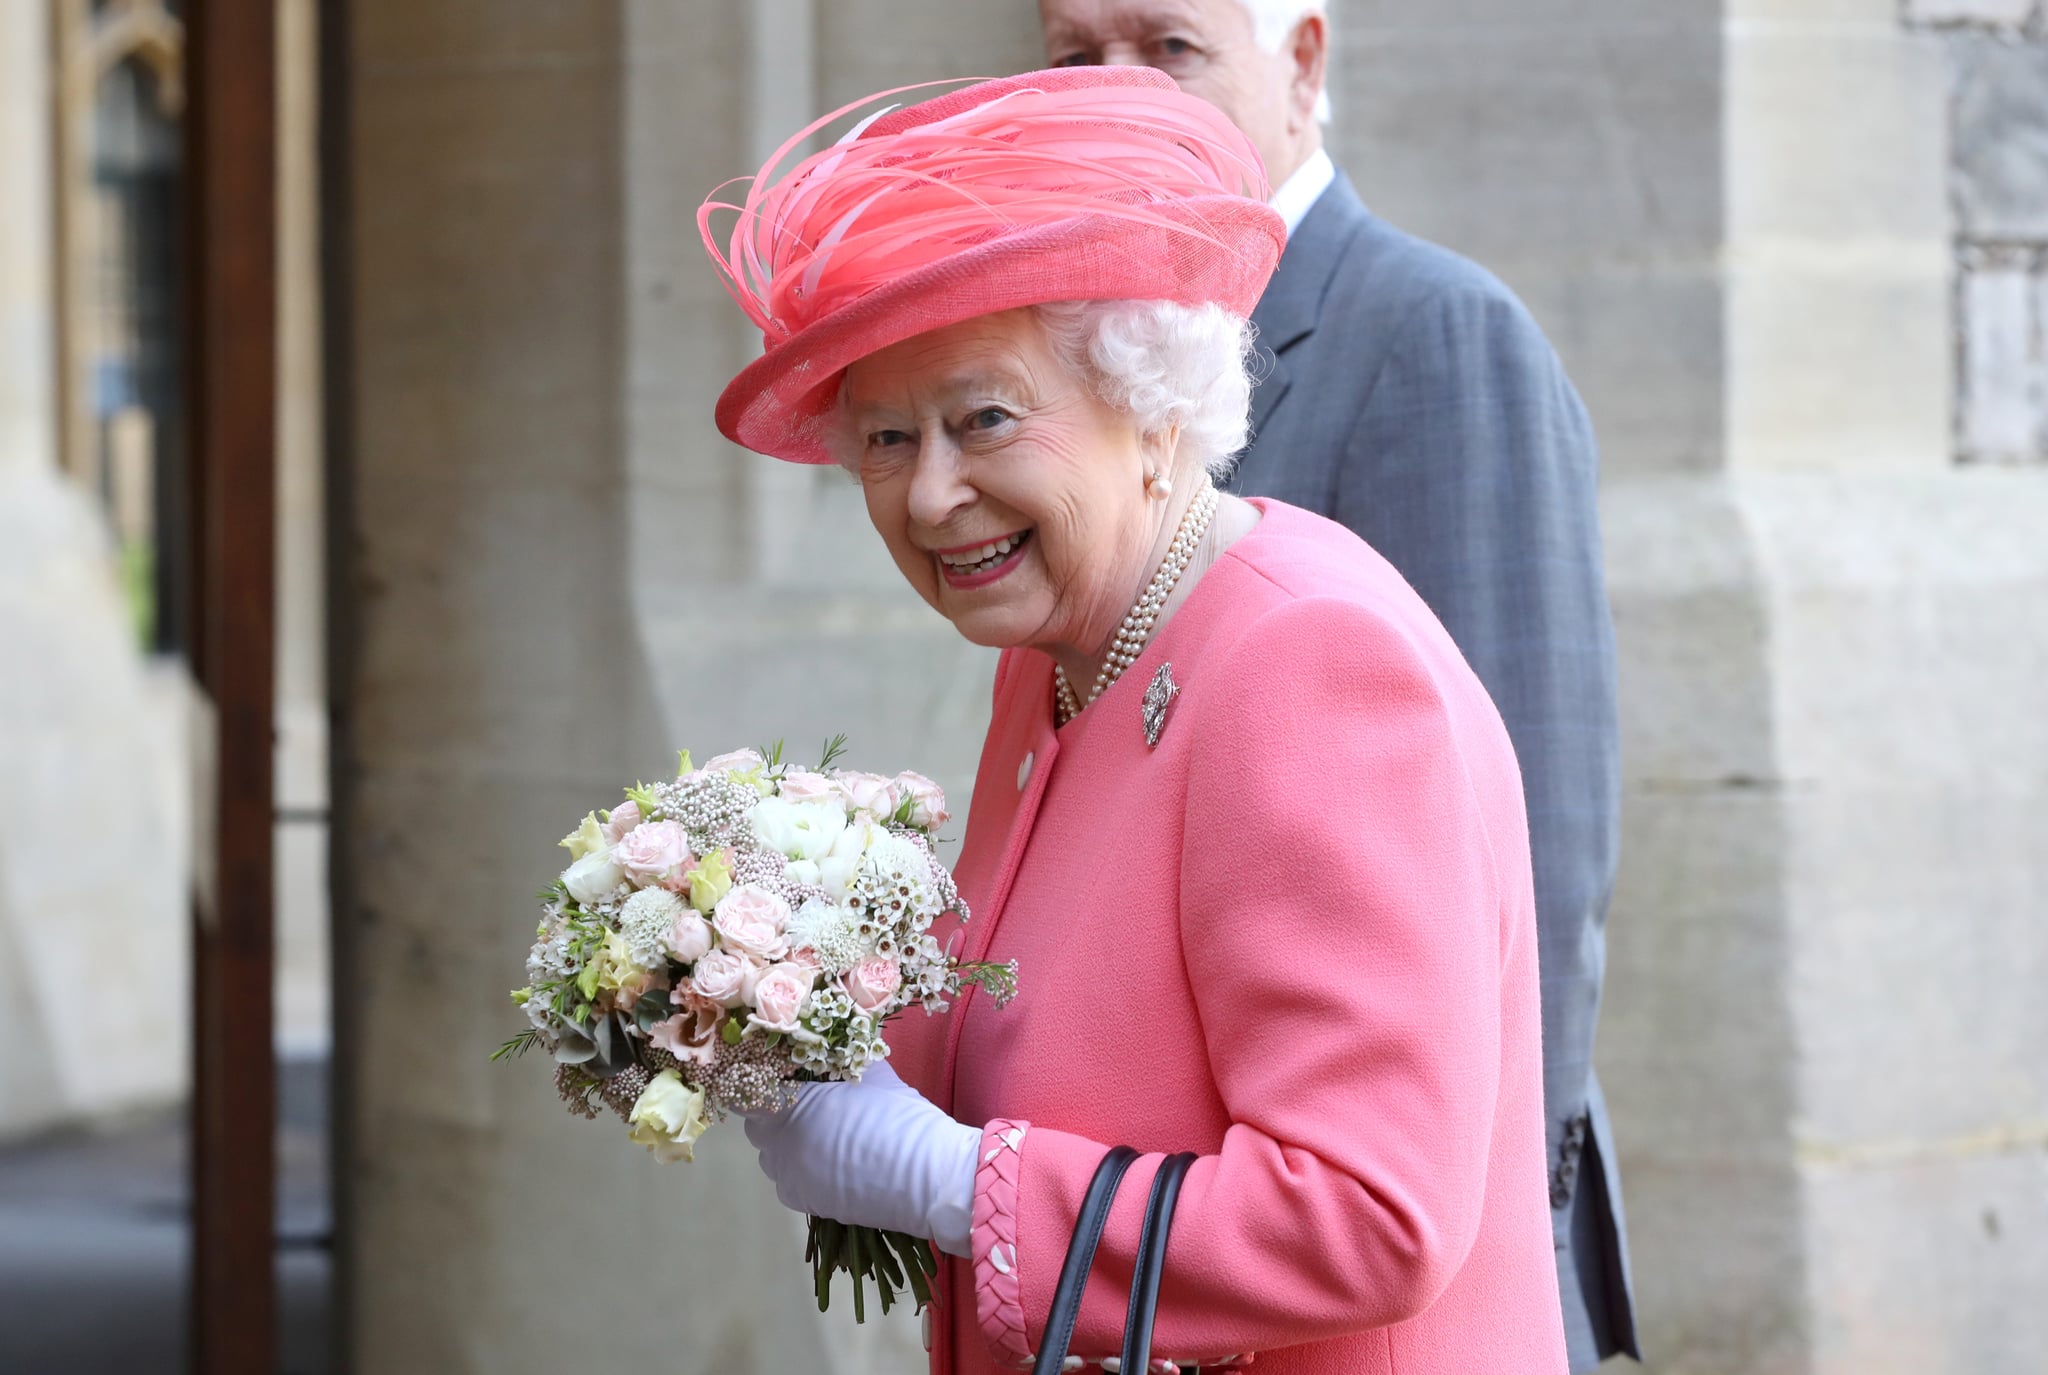 WINDSOR, ENGLAND - APRIL 22:  Queen Elizabeth II smiles after she started the London Marathon from Windsor Castle, which was relayed to big screens at Blackheath, setting off 40,000 runners on the 26.2 miles to The Mall, on April 22, 2018 in Windsor, England.  (Photo by Chris Jackson - WPA Pool/Getty Images)